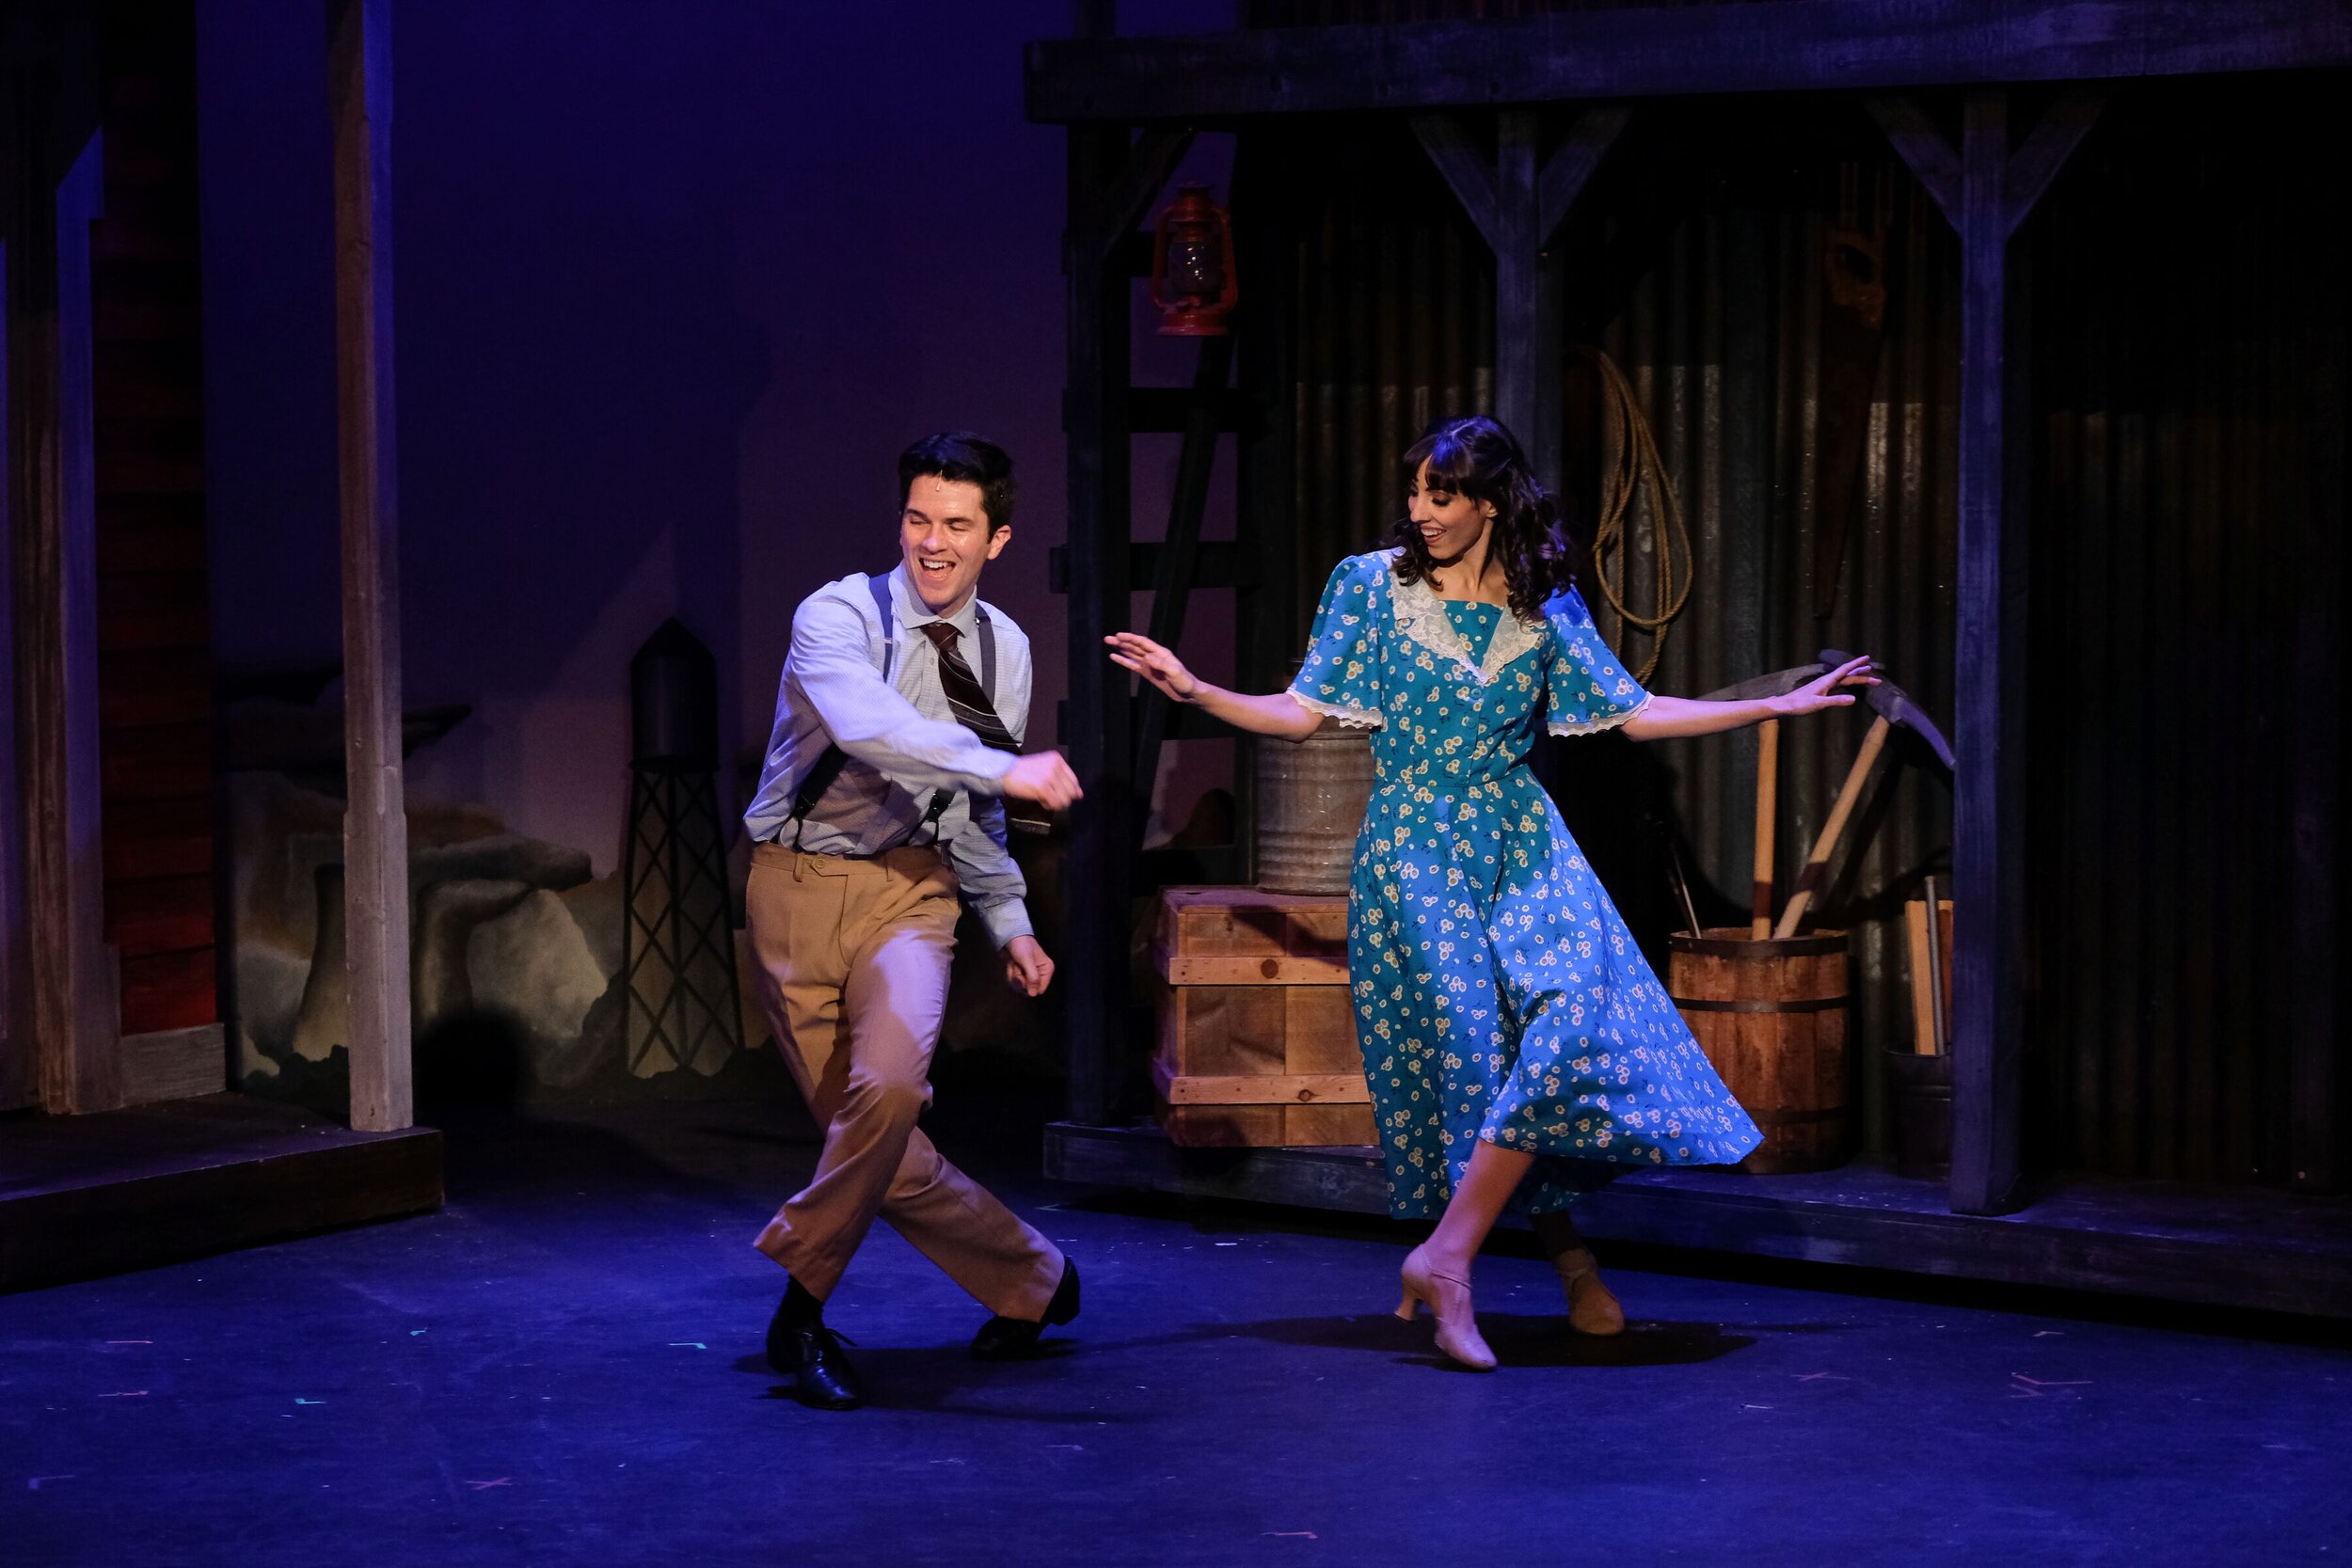   Crazy for You  at San Diego Musical Theatre. Photo: Ken Jacques Photography 